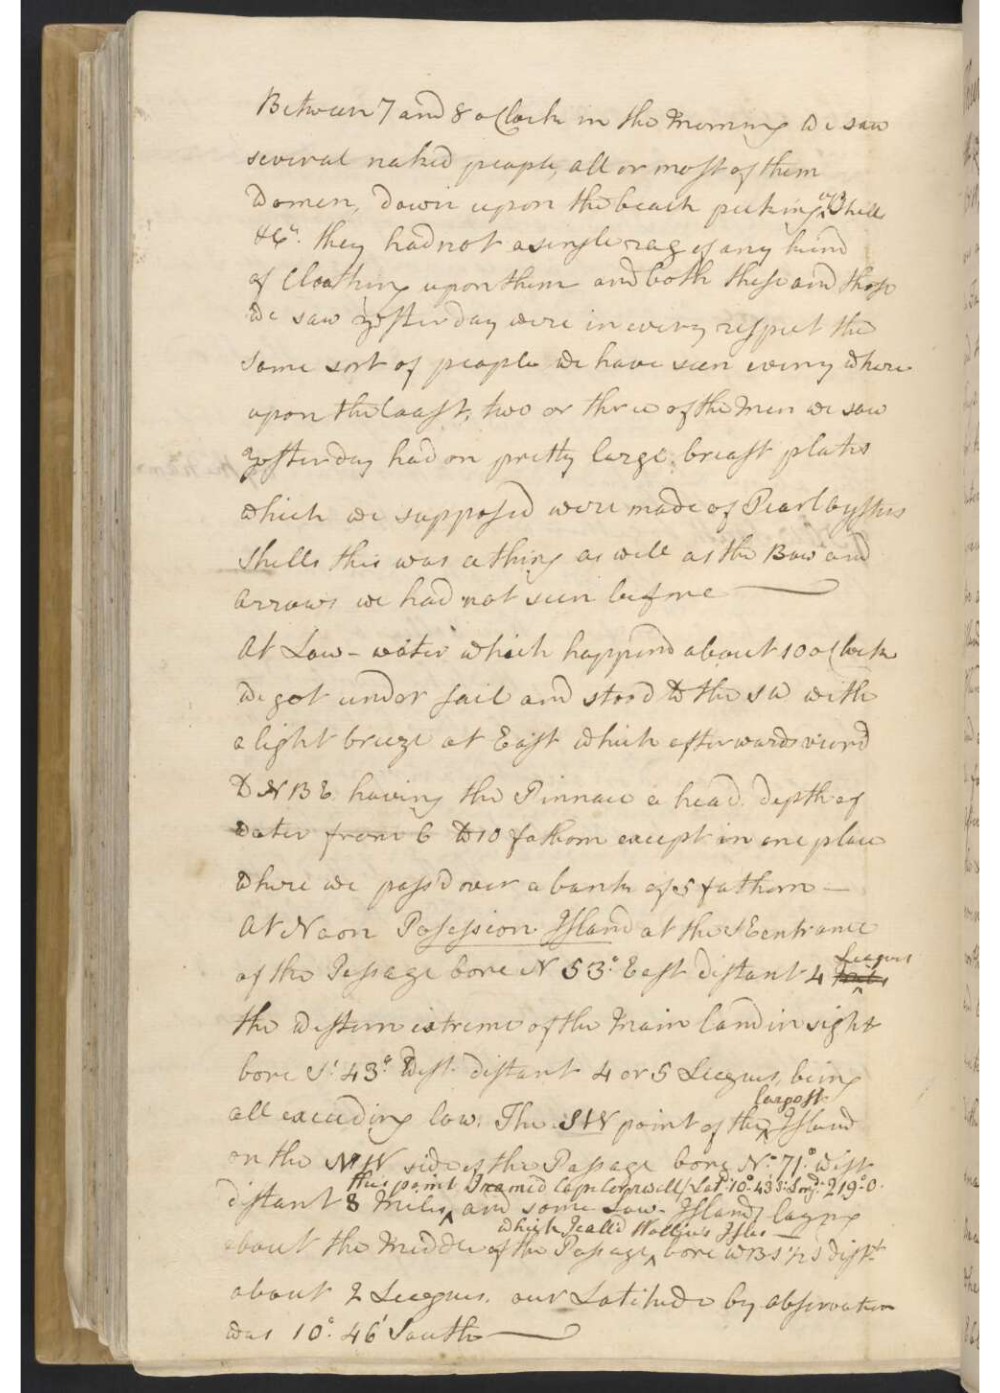 Image of Lt Cook's Endeavour Journal 22 August 1770 Possession Island - Courtesy of the National Library of Australia